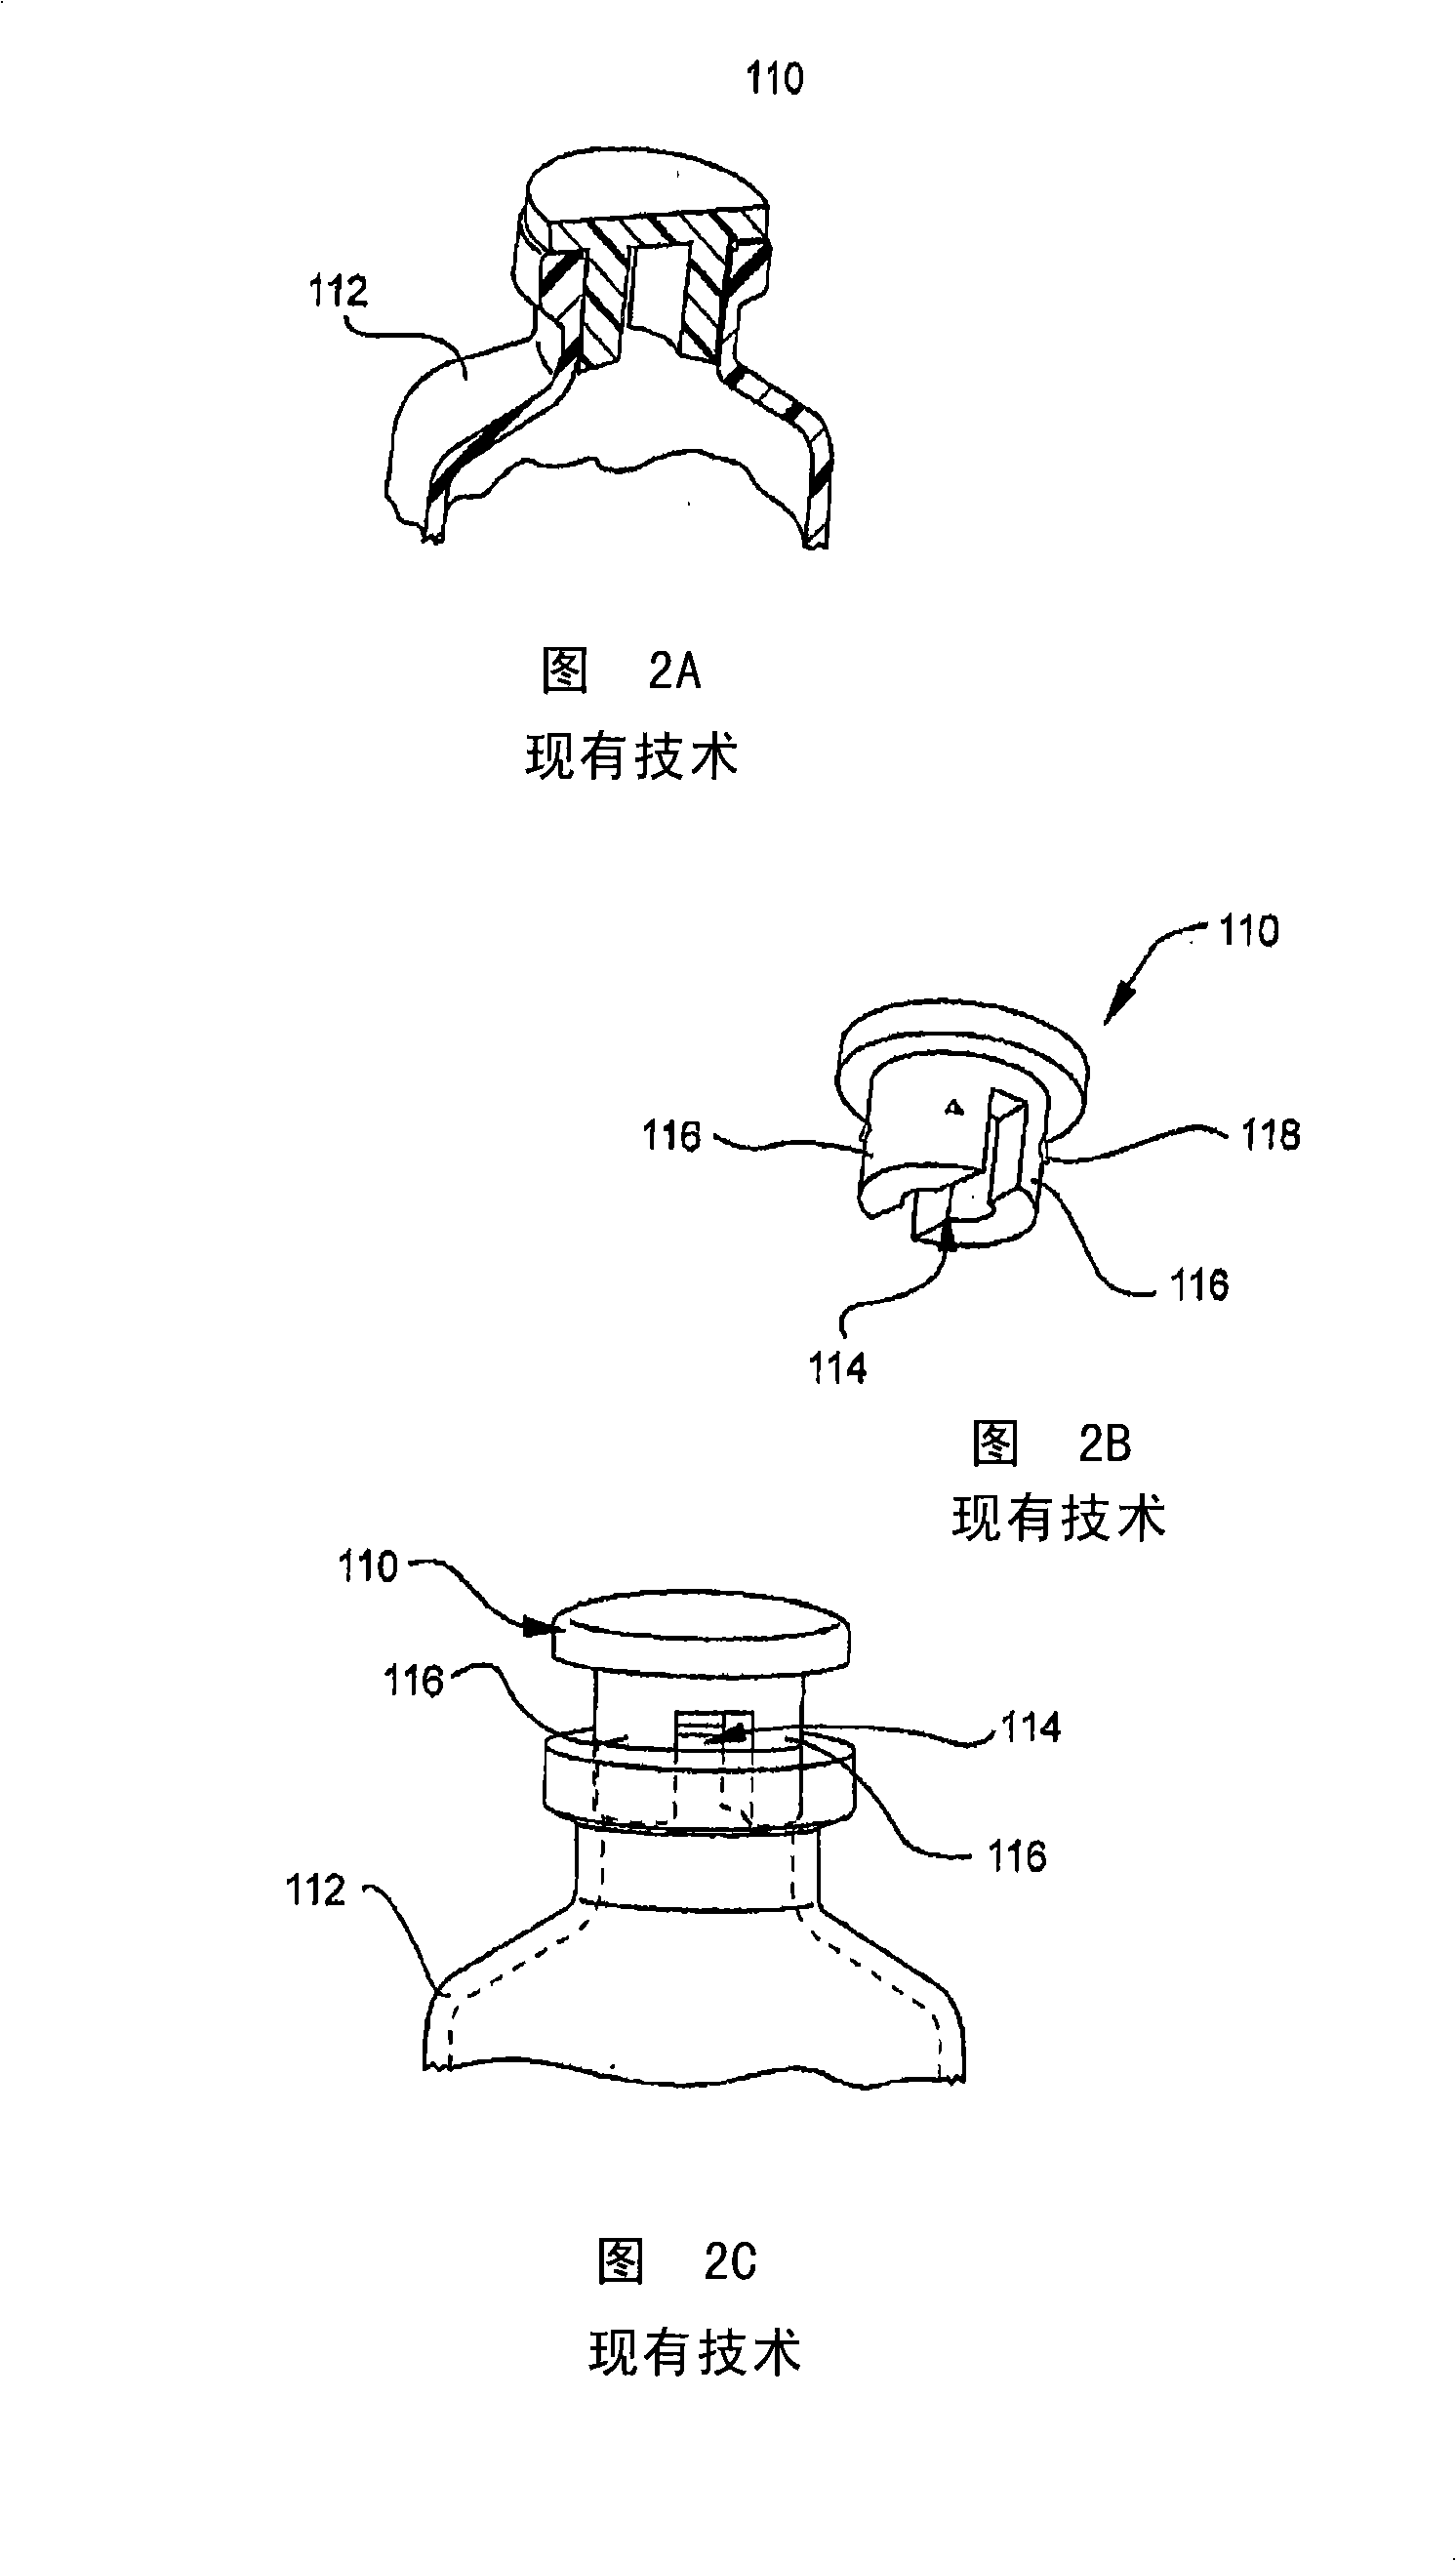 Specimen enclosure apparatus and containers and closure devices for the same